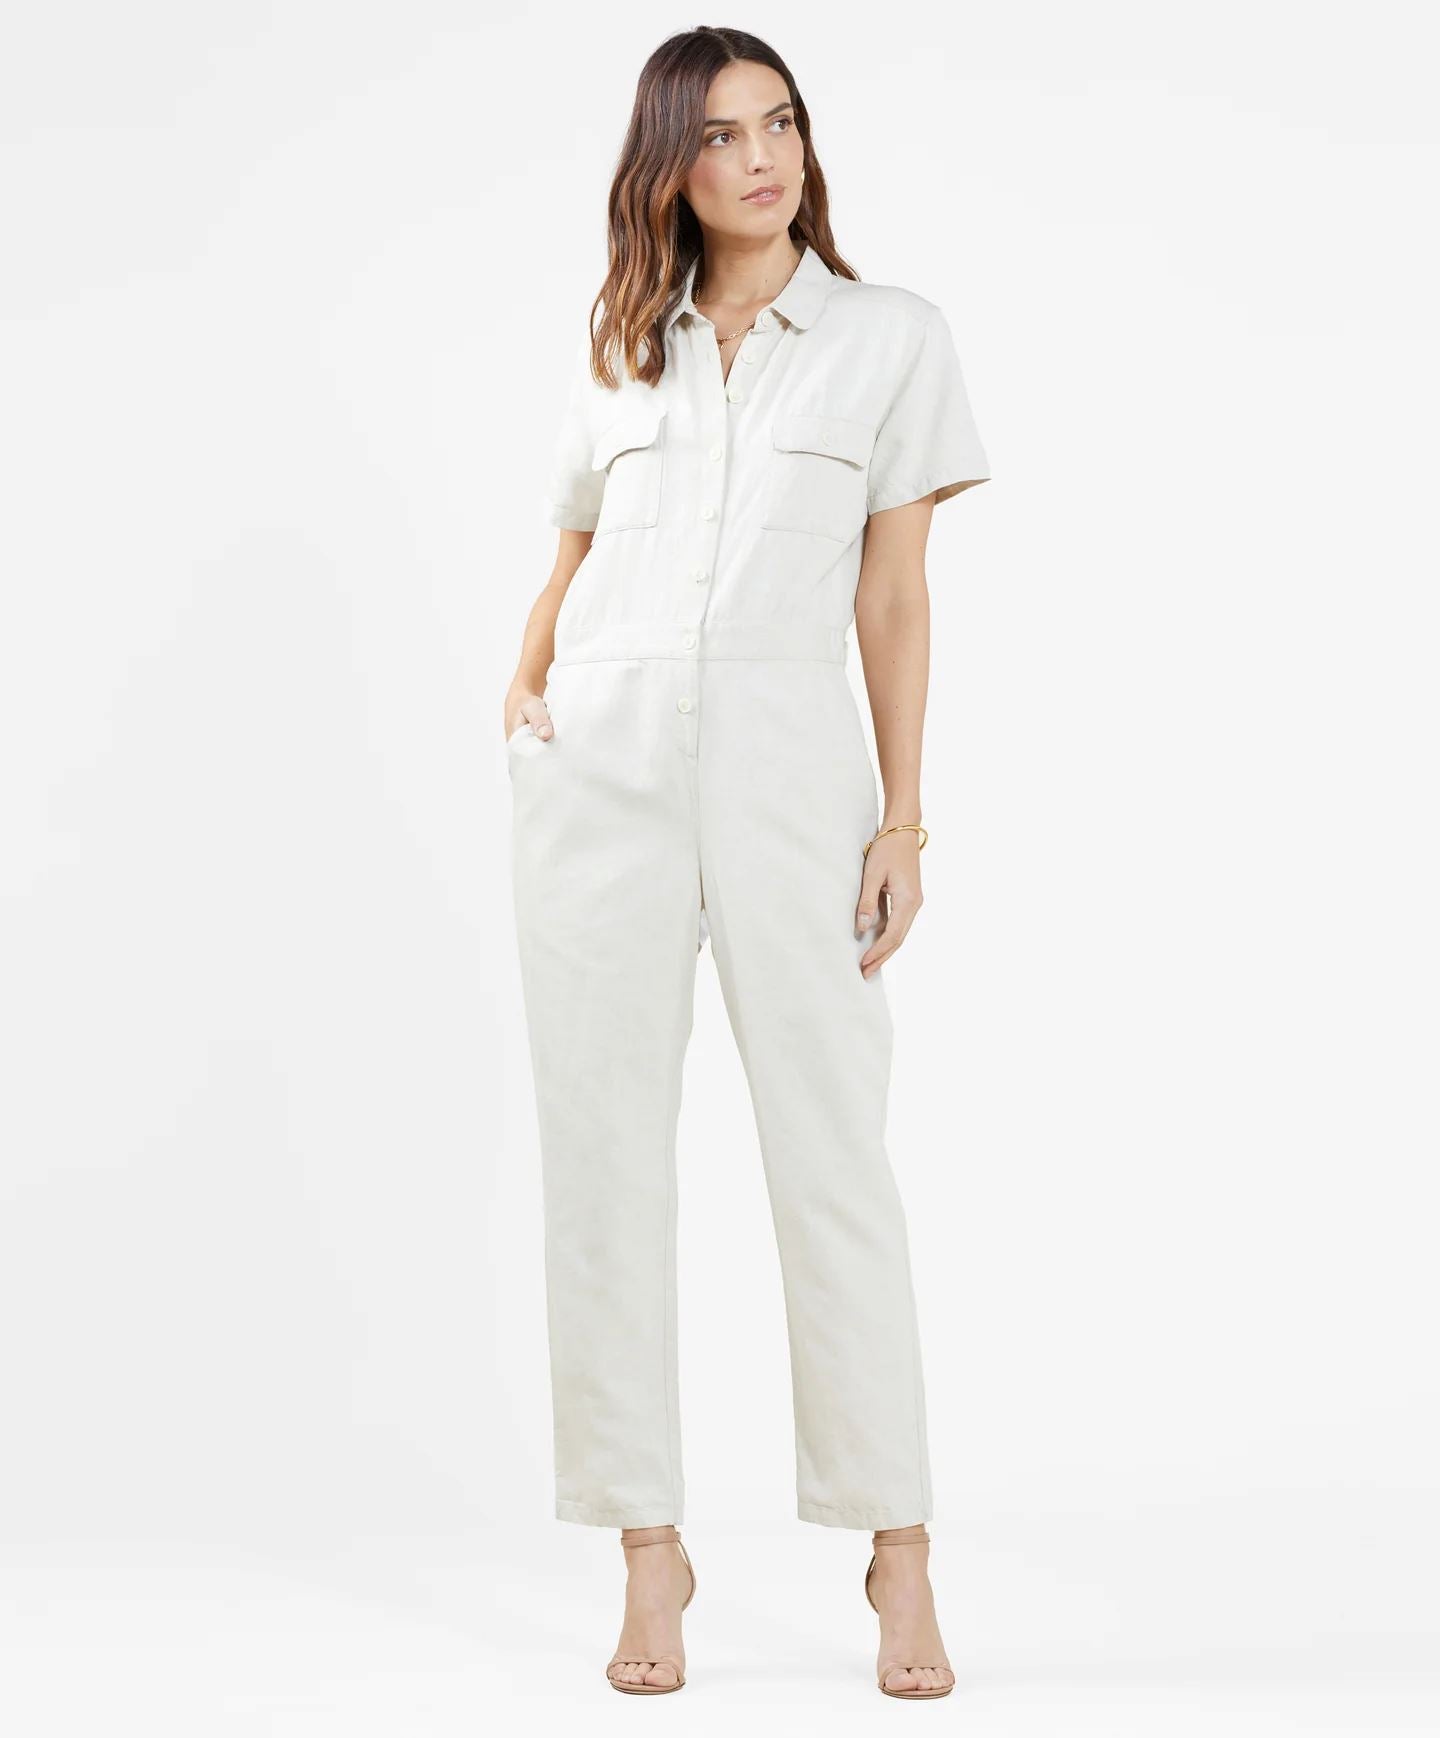 OuterKnown S.E.A. Suit Jumpsuits OUTERKNOWN WOMENS 